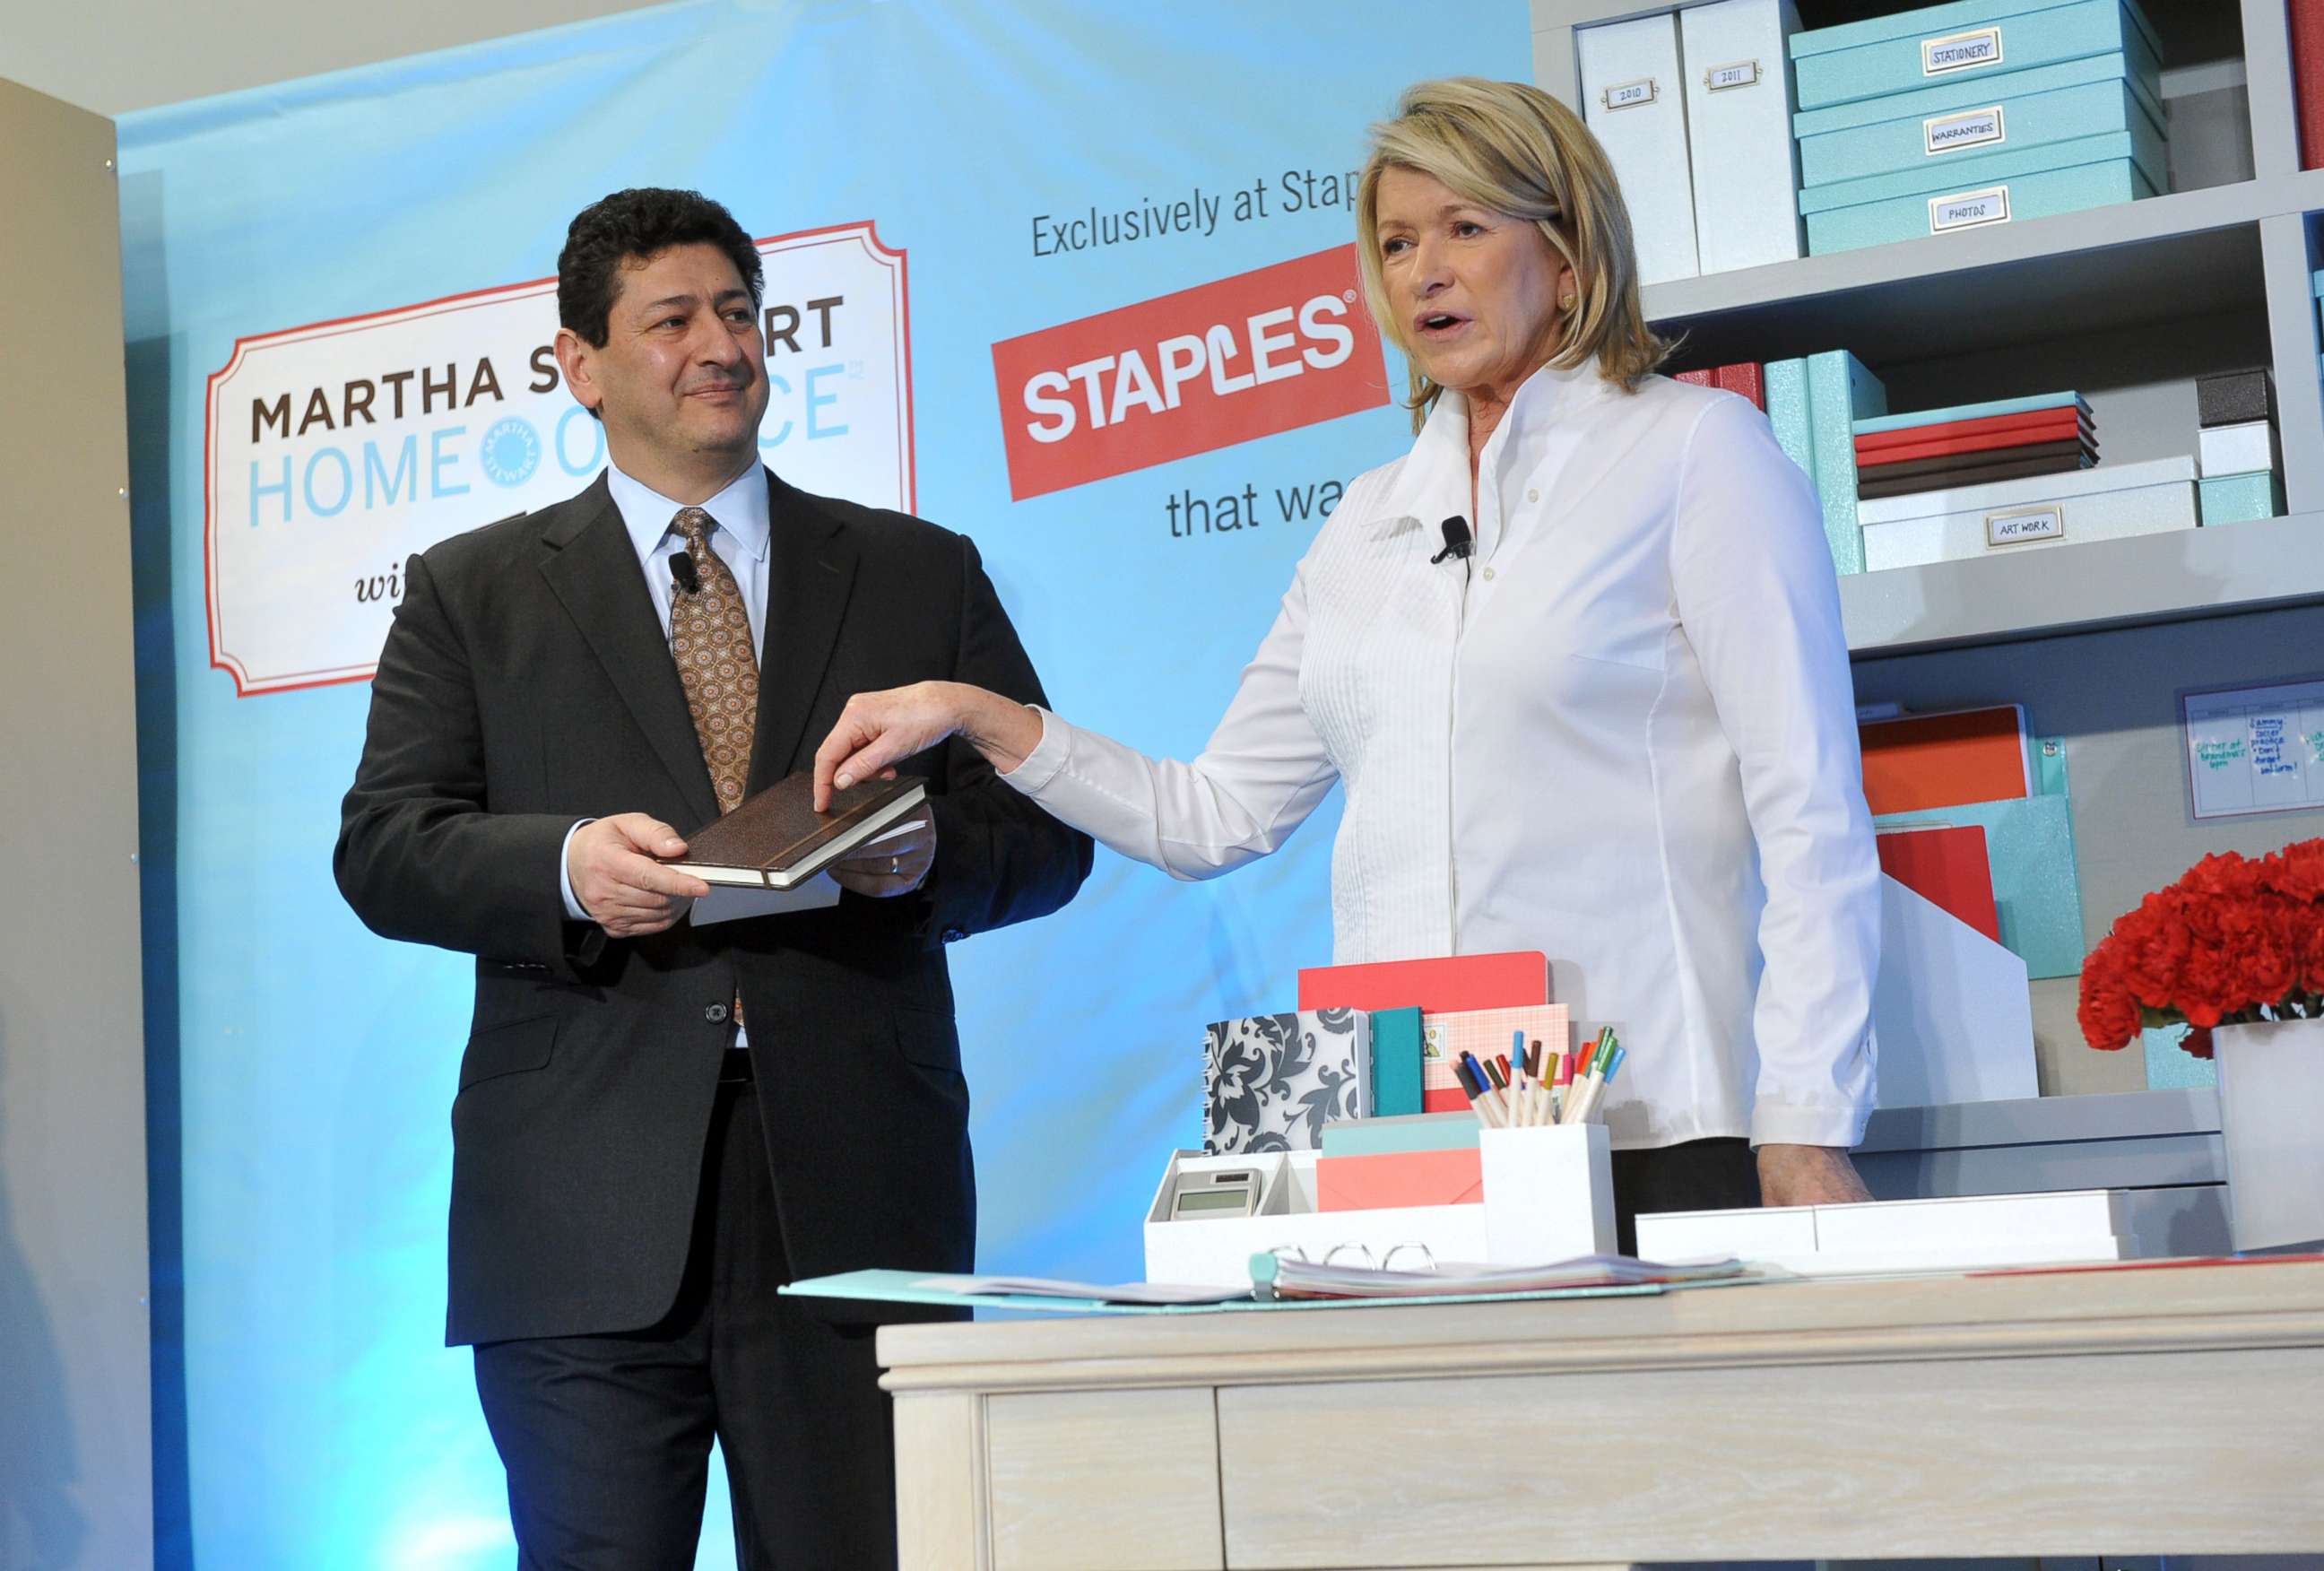 PHOTO: Demos Parneros at Staples, during the launch of the Martha Stewart Home Office with Avery product line sold exclusively at Staples, Feb. 7, 2012, in New York. 